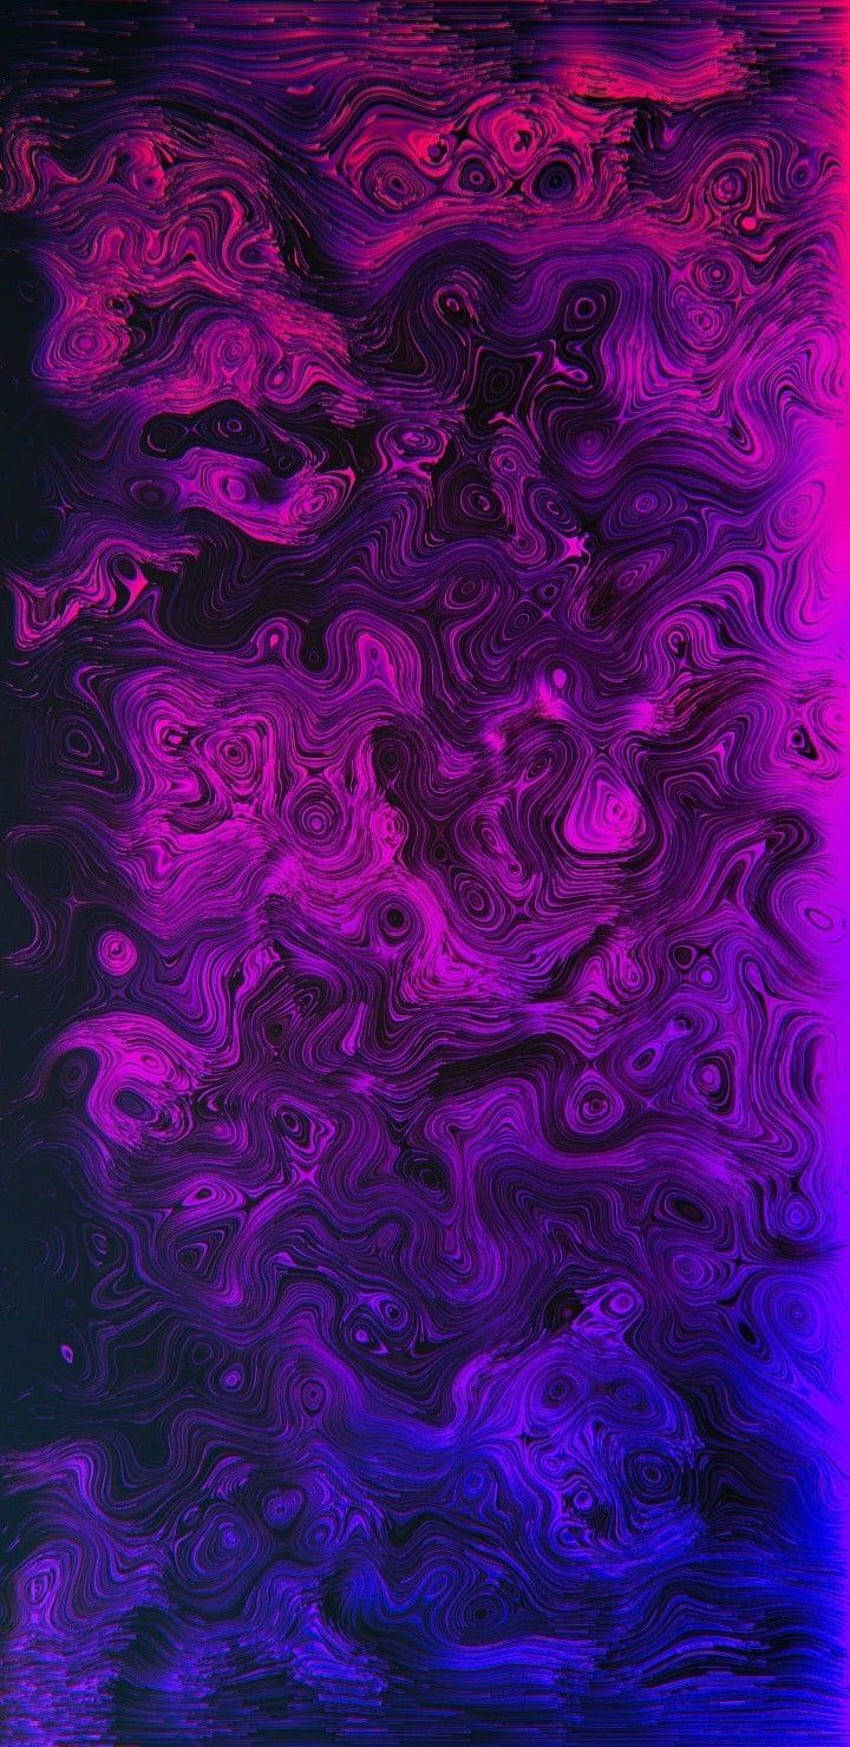 Dark Psychedelic Abstract Waves On Iphone Wallpaper